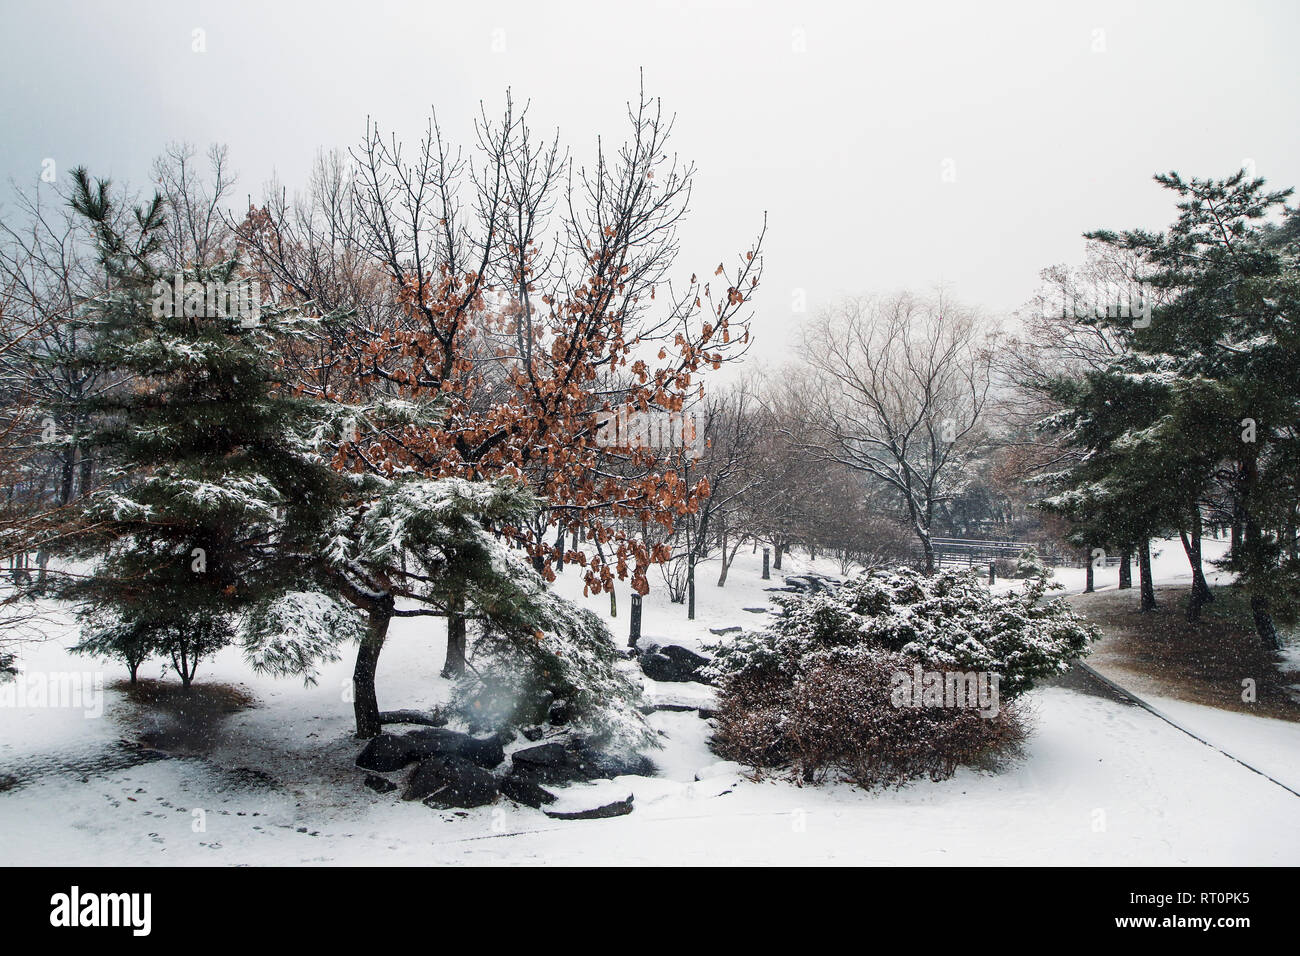 A Picture from the Yeouido park in Seoul in South Korea during the cold winter day and a snowfall. Stock Photo